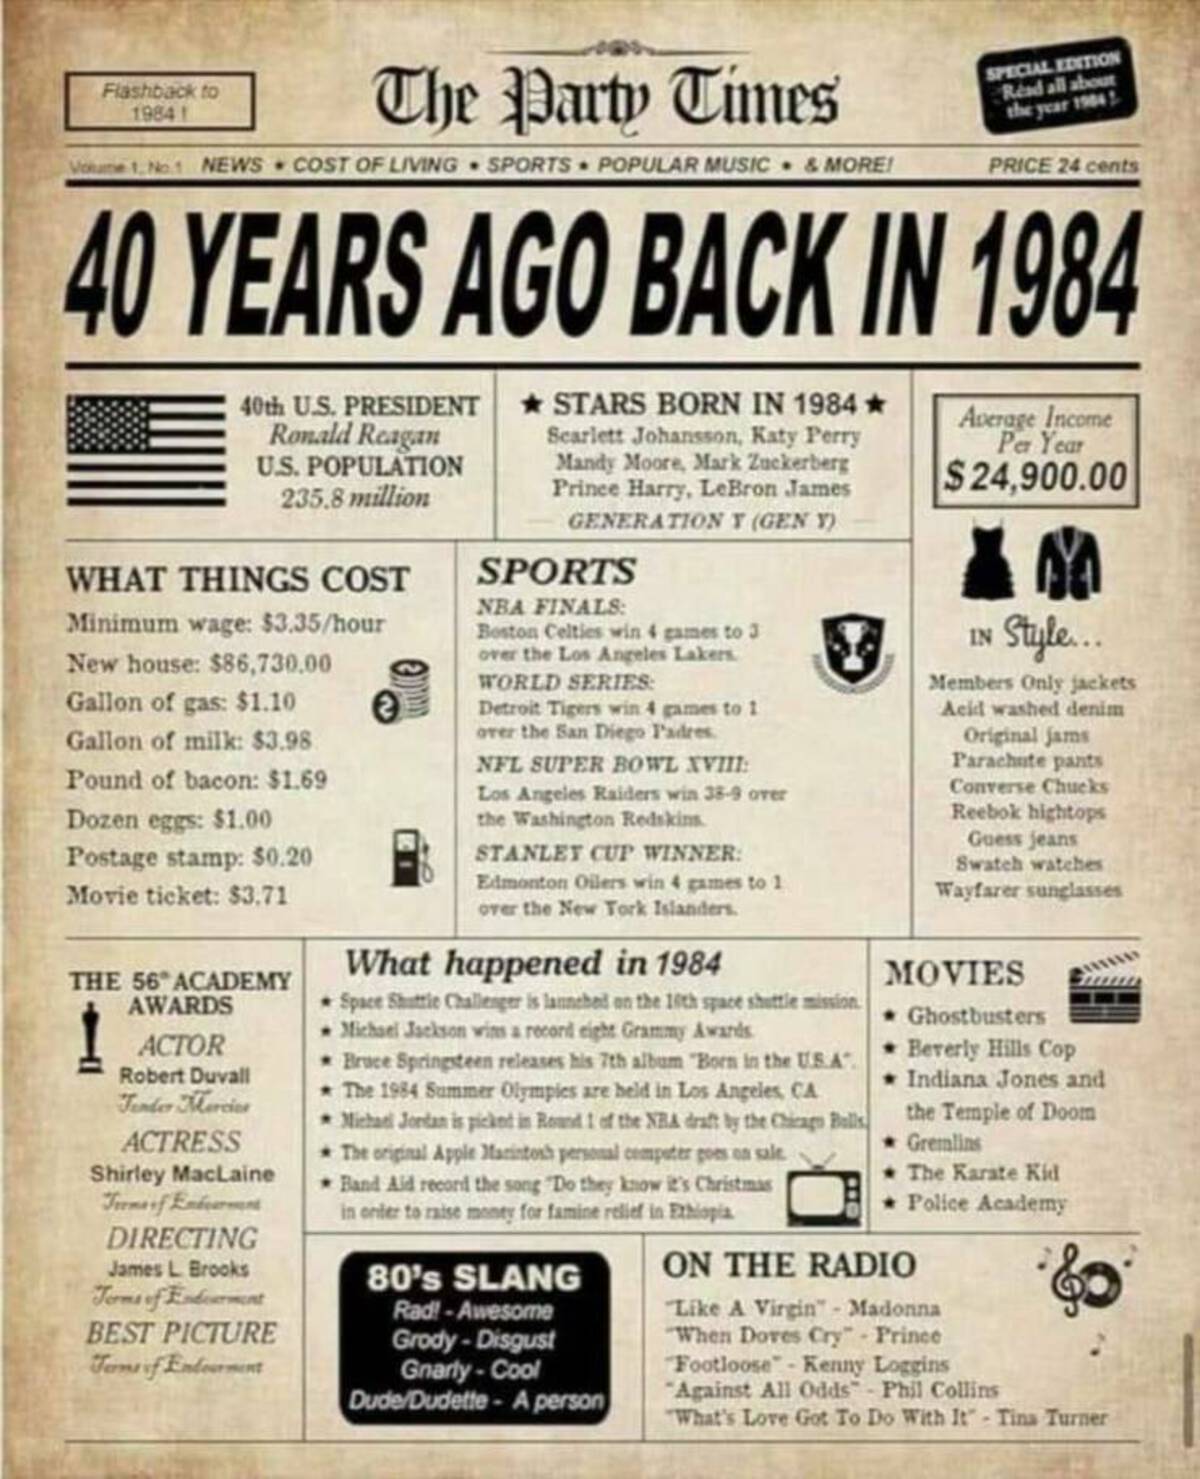 newspaper - Flashback to 19841 The Party Times Volume 1, No.1 News Cost Of Living Sports Popular Music & More! Special Edition Read all about the year 1904 Price 24 cents 40 Years Ago Back In 1984 40th U.S. President Ronald Reagan U.S. Population 235.8 mi